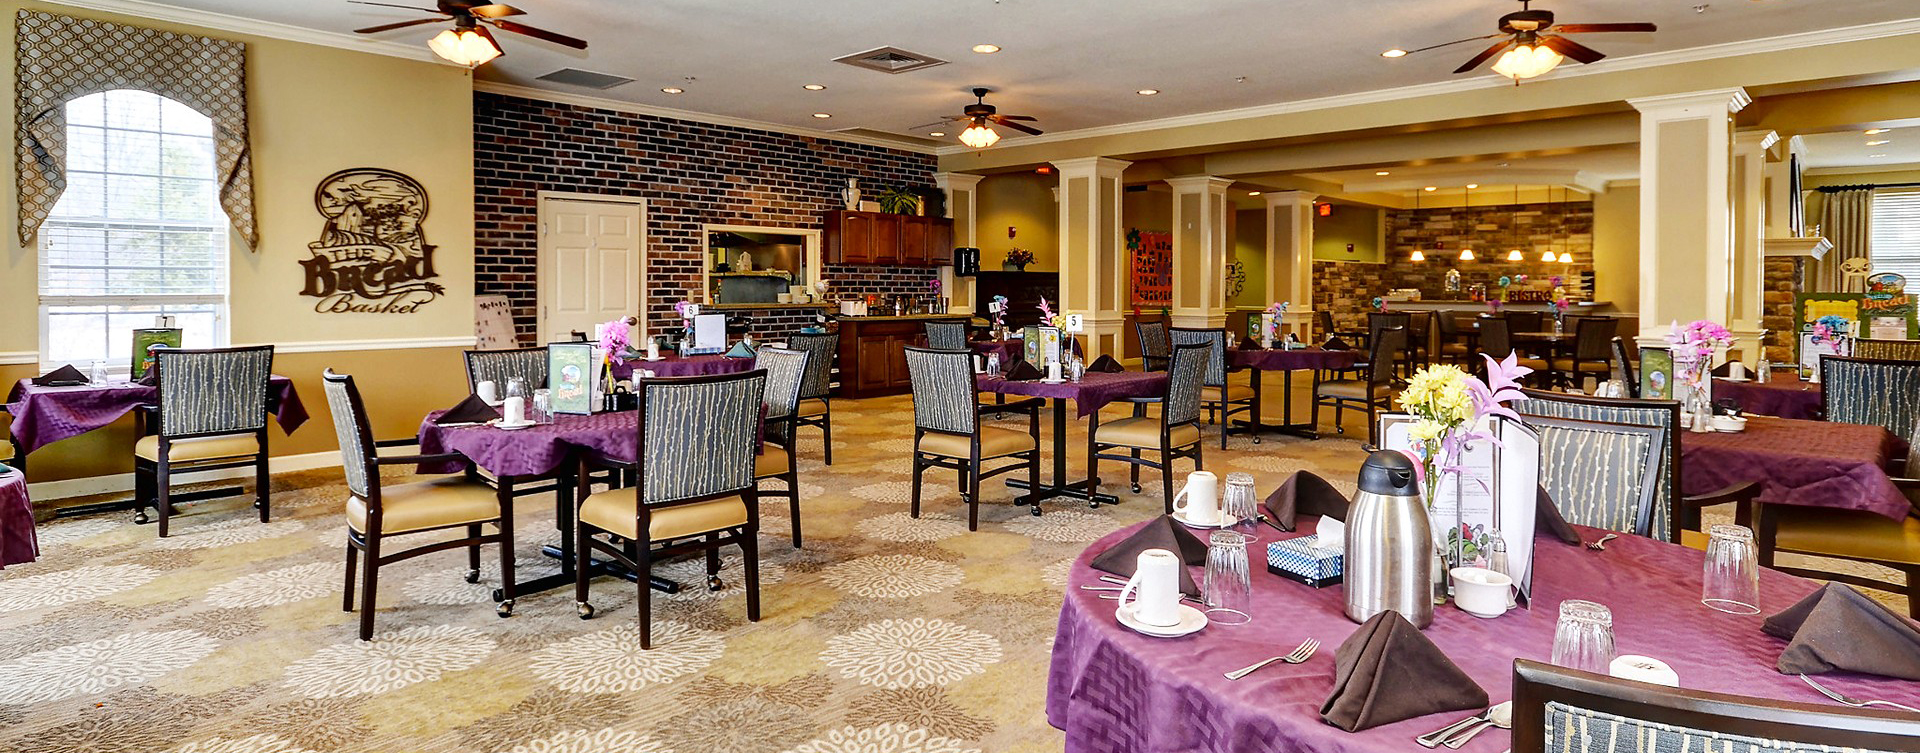 Food is best when shared with friends in the dining room at Bickford of Crystal Lake